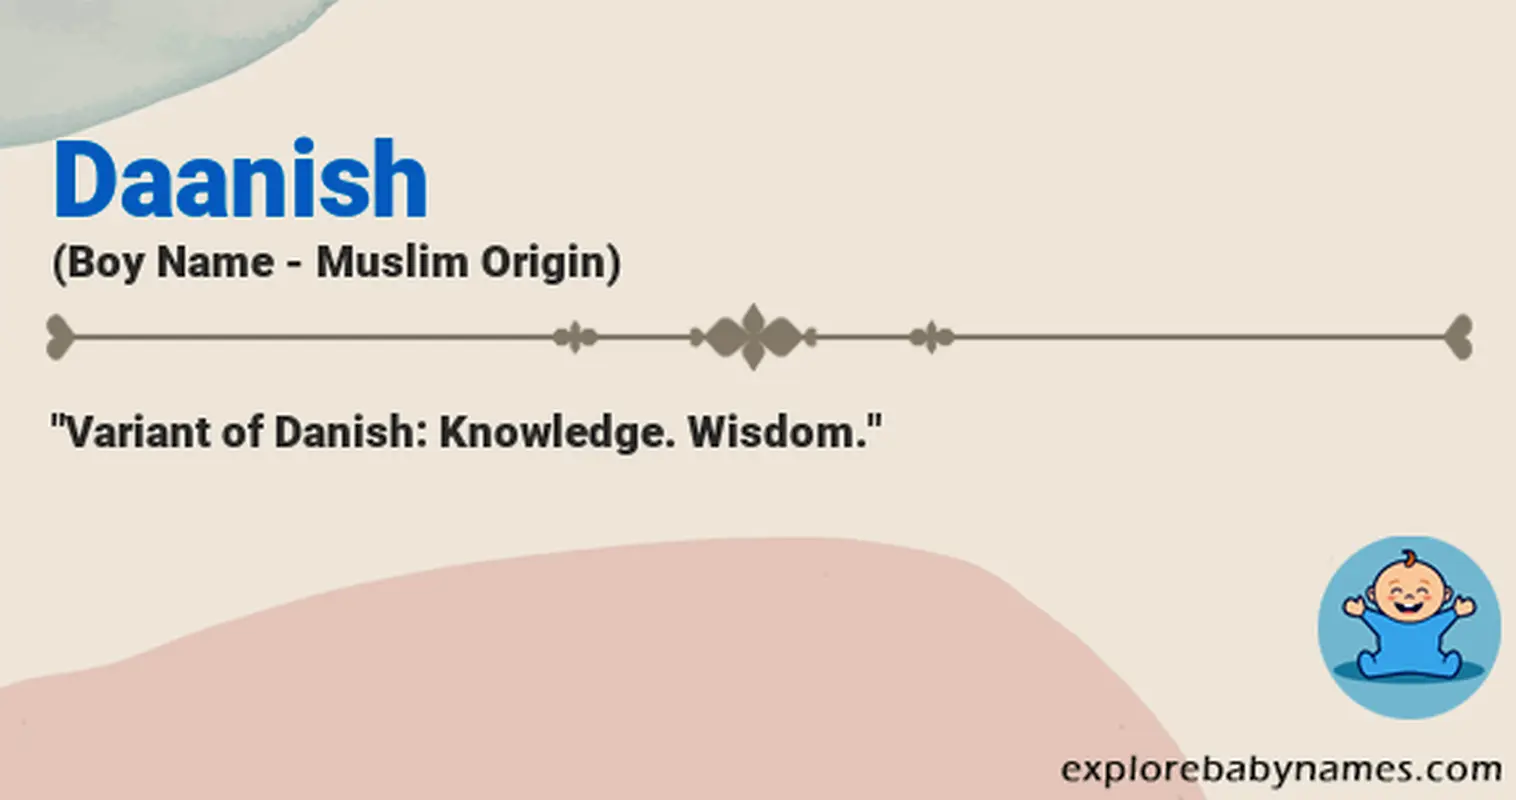 Meaning of Daanish